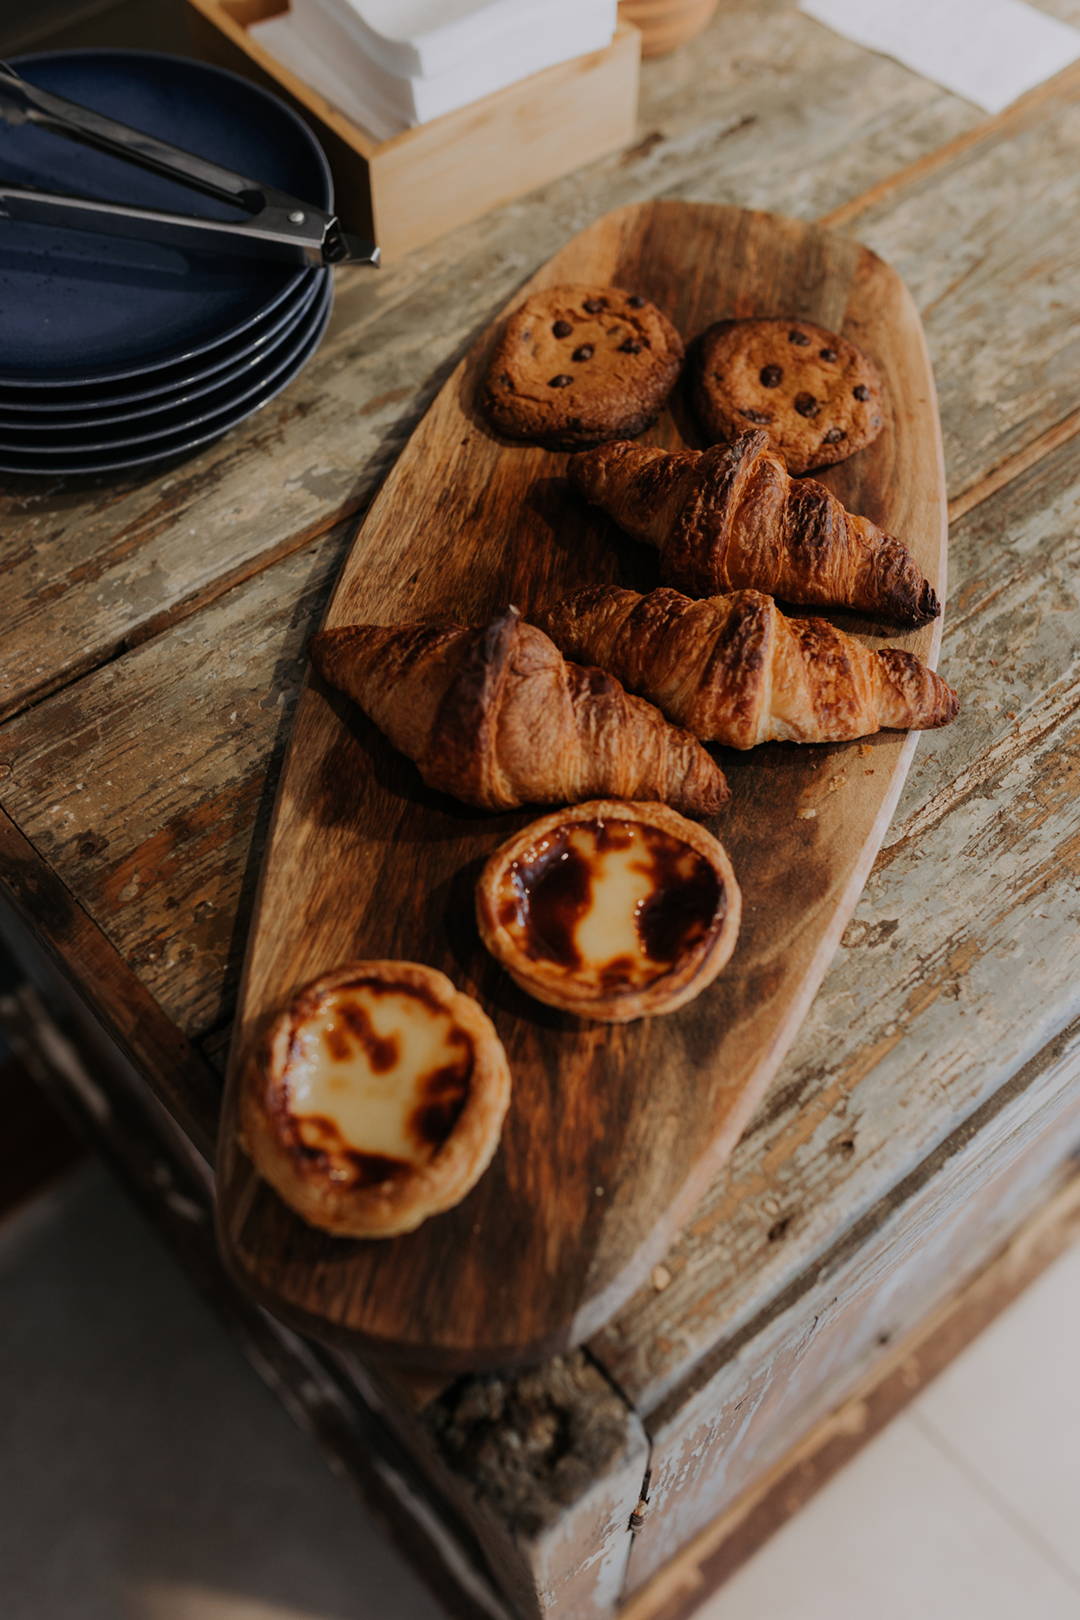 Croissants and pastéis de nata are some of the sweet snacks served at SO Coffee Roasters